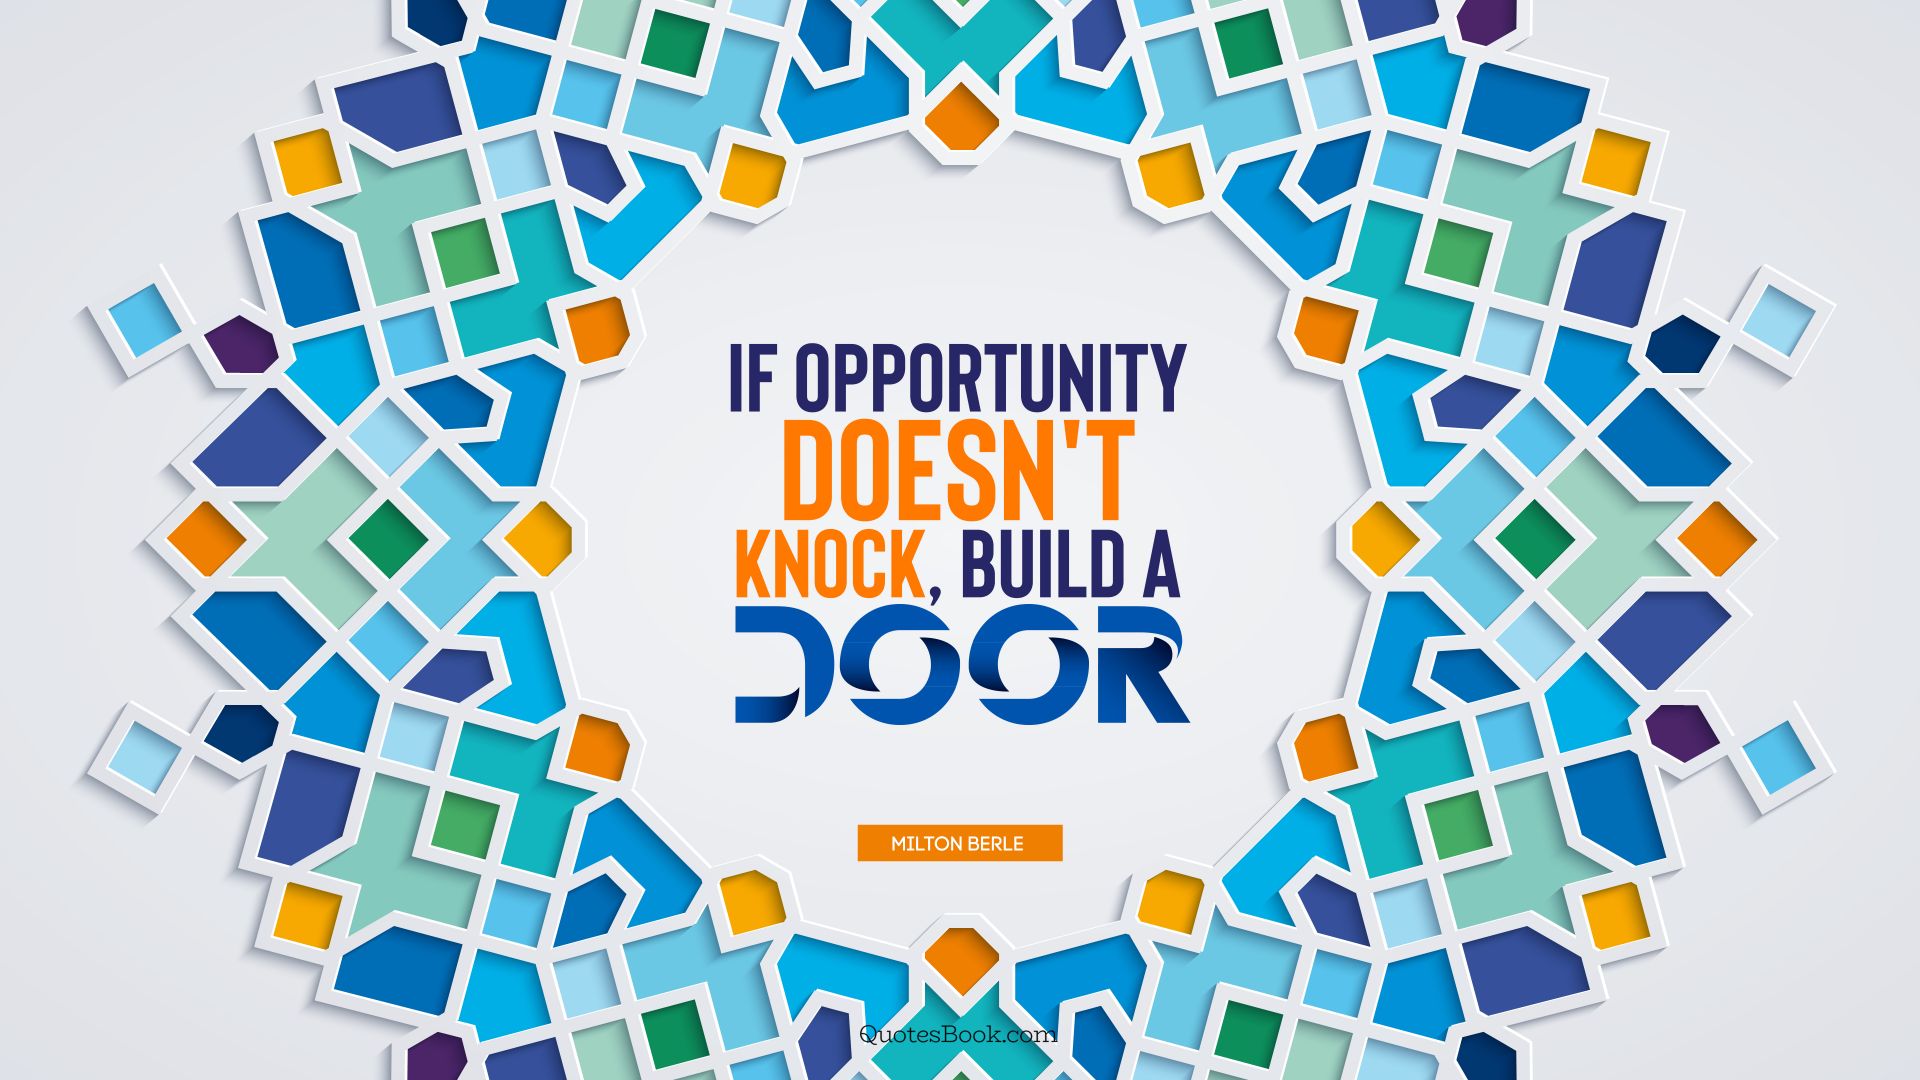 If opportunity doesn't knock, build a door. - Quote by Milton Berle